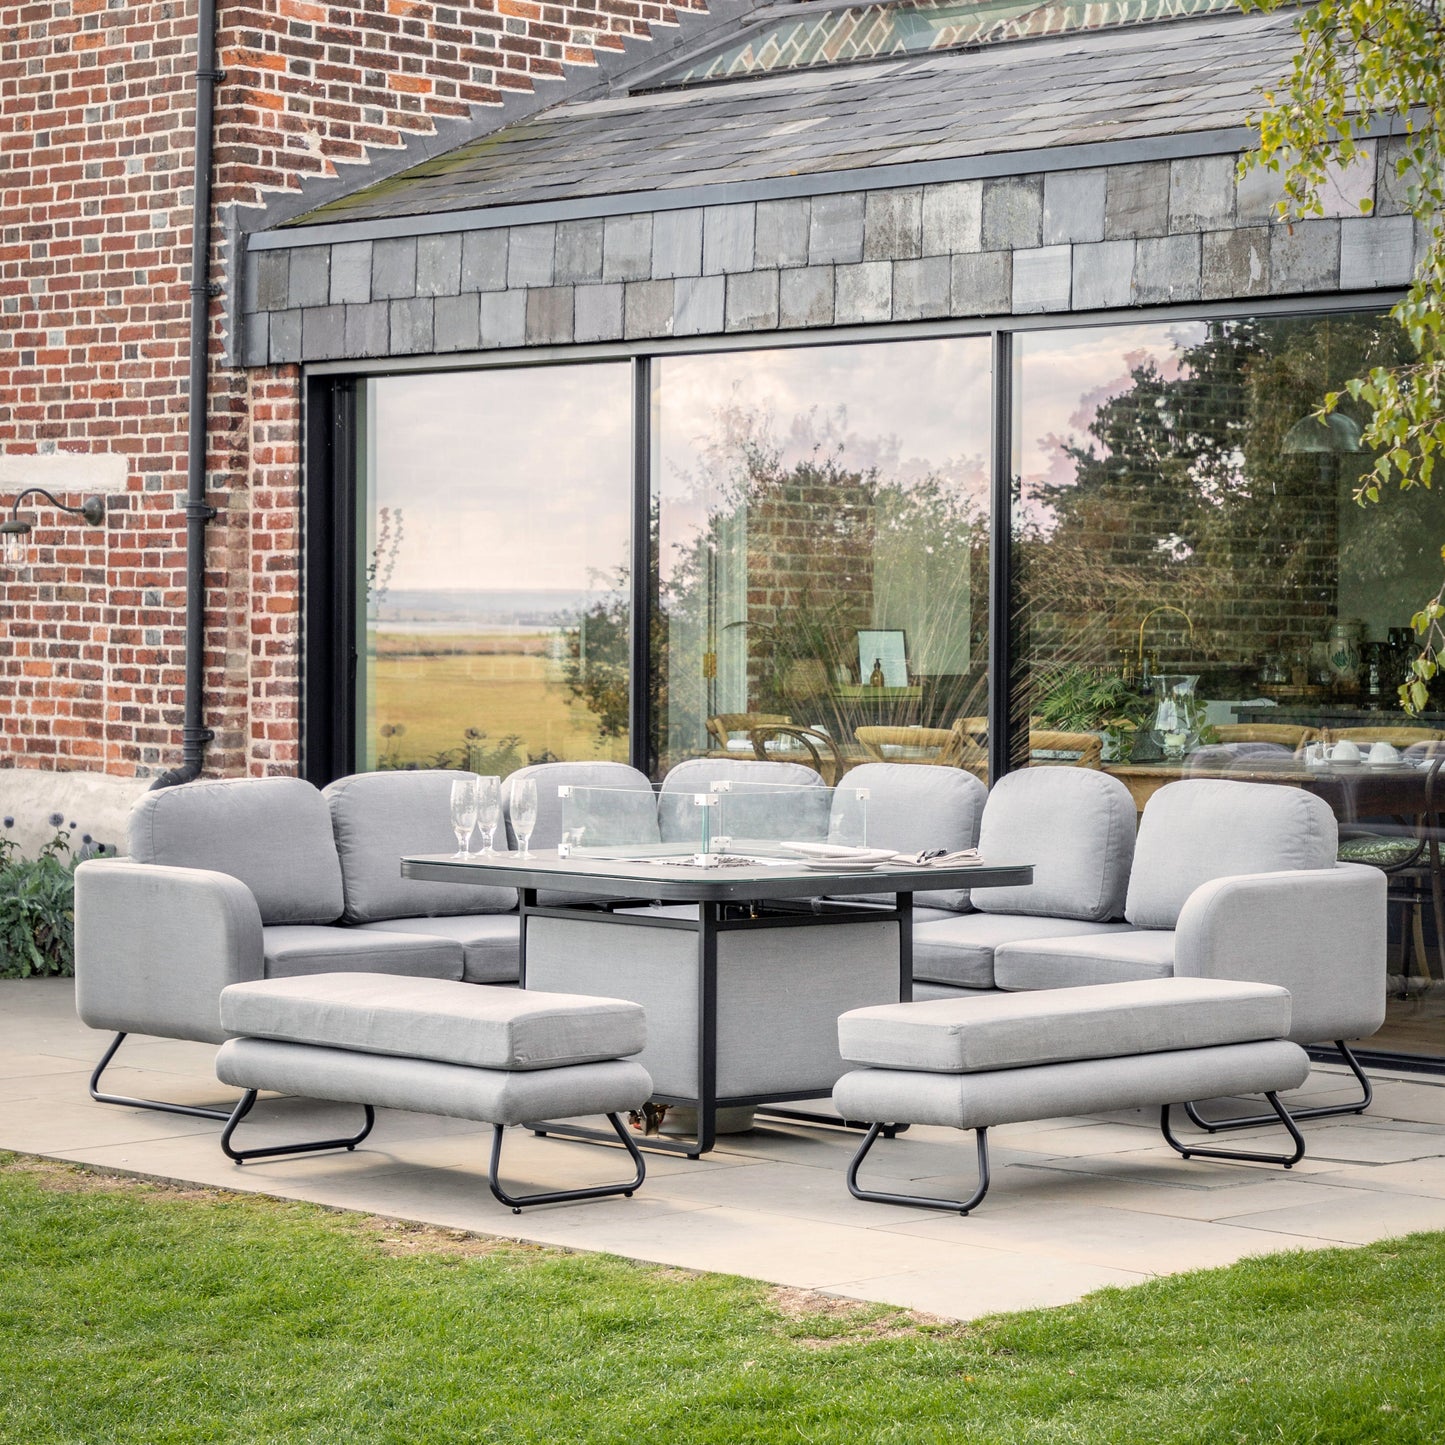 A sleek grey Topsham Dining Set with Fire Pit Table Slate from Kikiathome.co.uk enhances this glass house's interior decor.